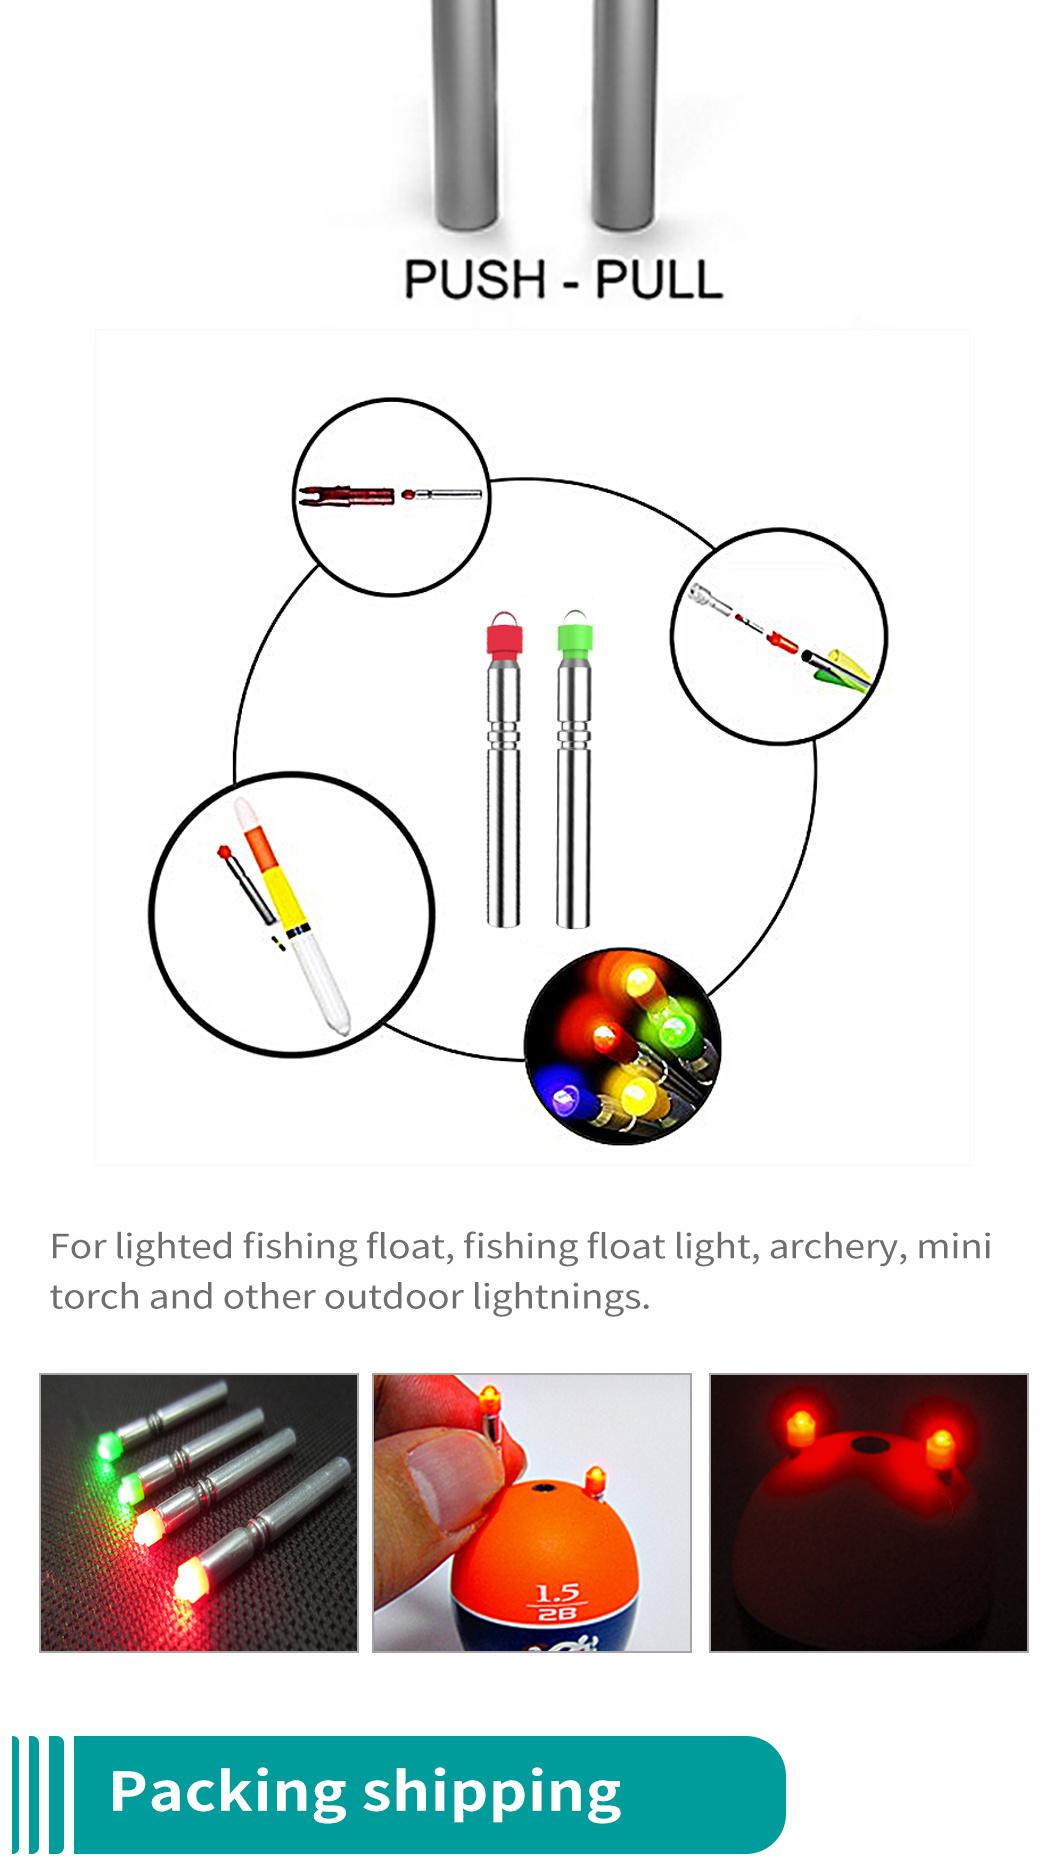 Dlyfull 3.0V Fishing Float Light LED Stick PS435 Red 2PCS=One Card for Night Fishing or Archery